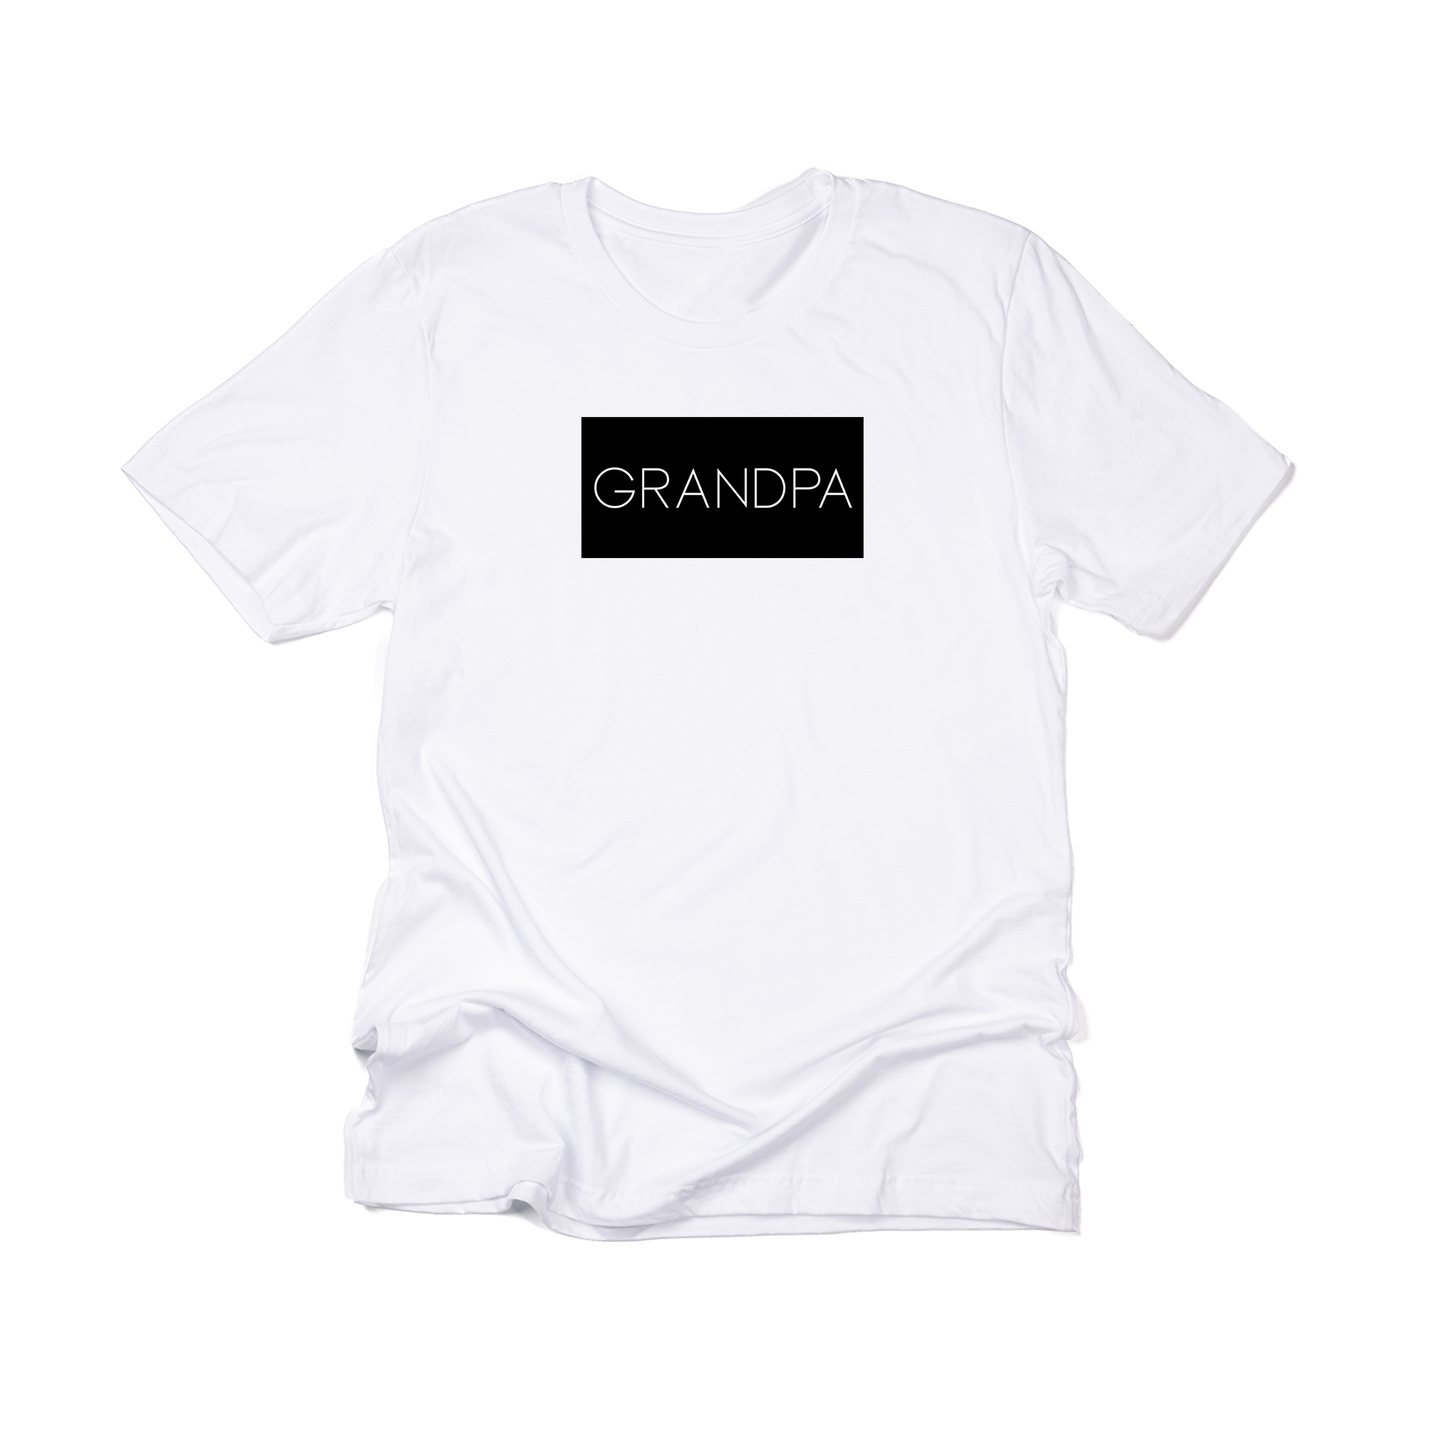 Grandpa (Boxed Collection, Black Box/White Text, Across Front) - Tee (White)